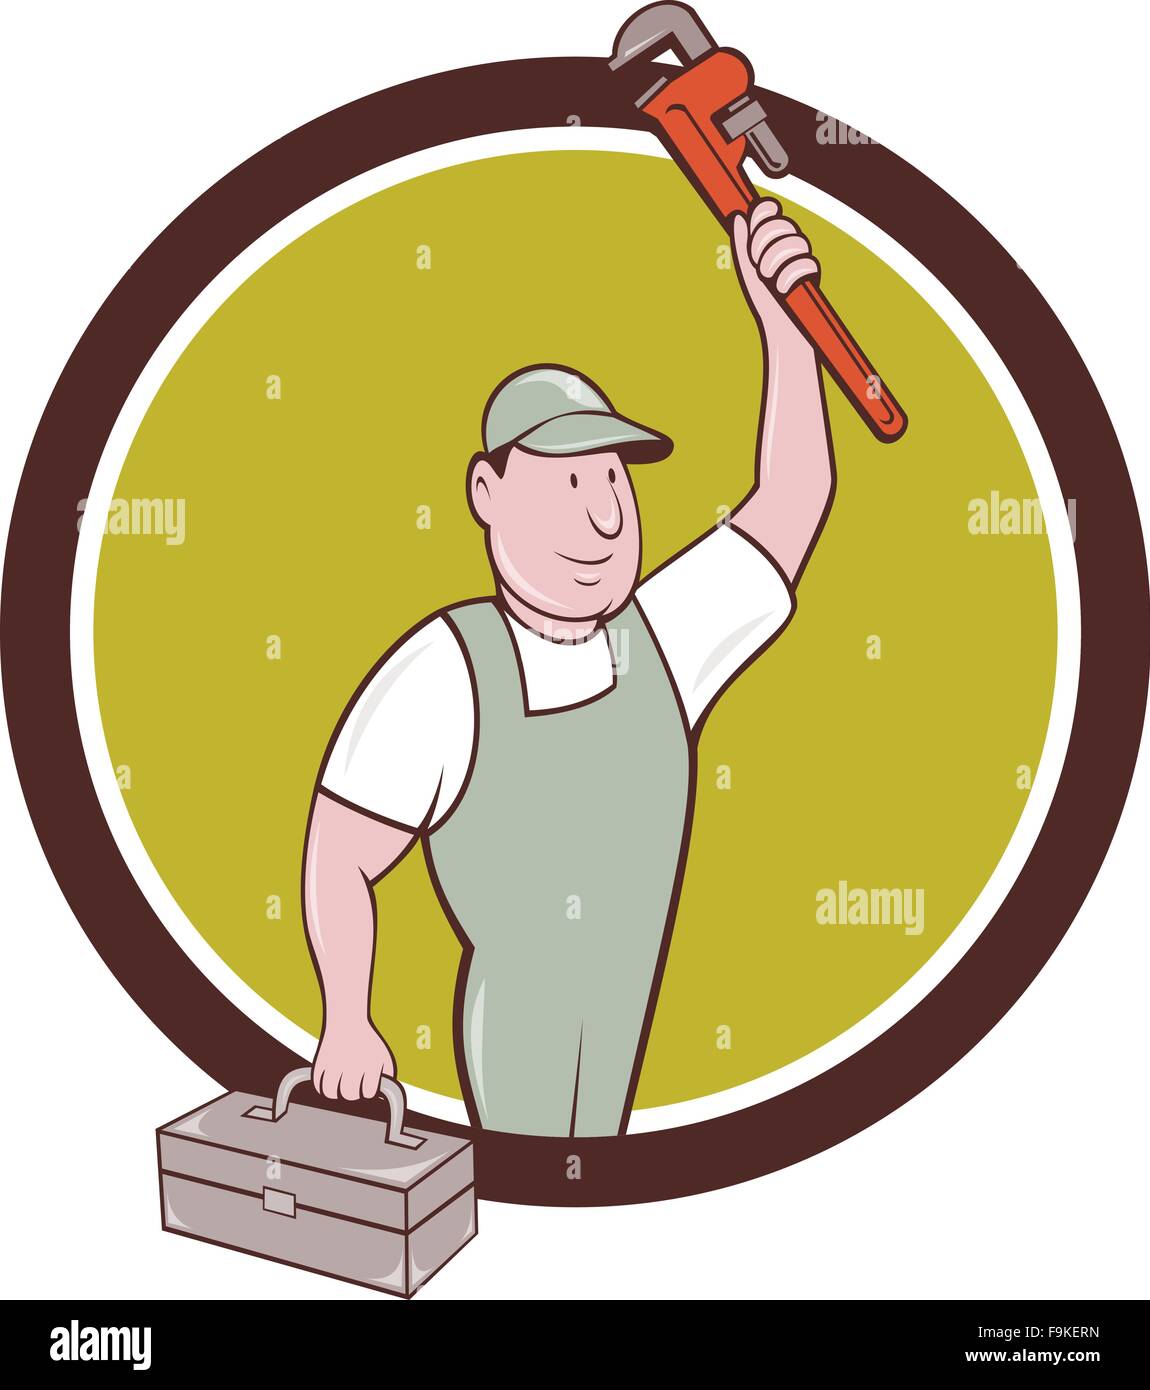 Illustration of a plumber holding monkey wrench raised up over head and carrying toolbox on the other hand looking to the side set inside circle on isolated background done in cartoon style. Stock Vector